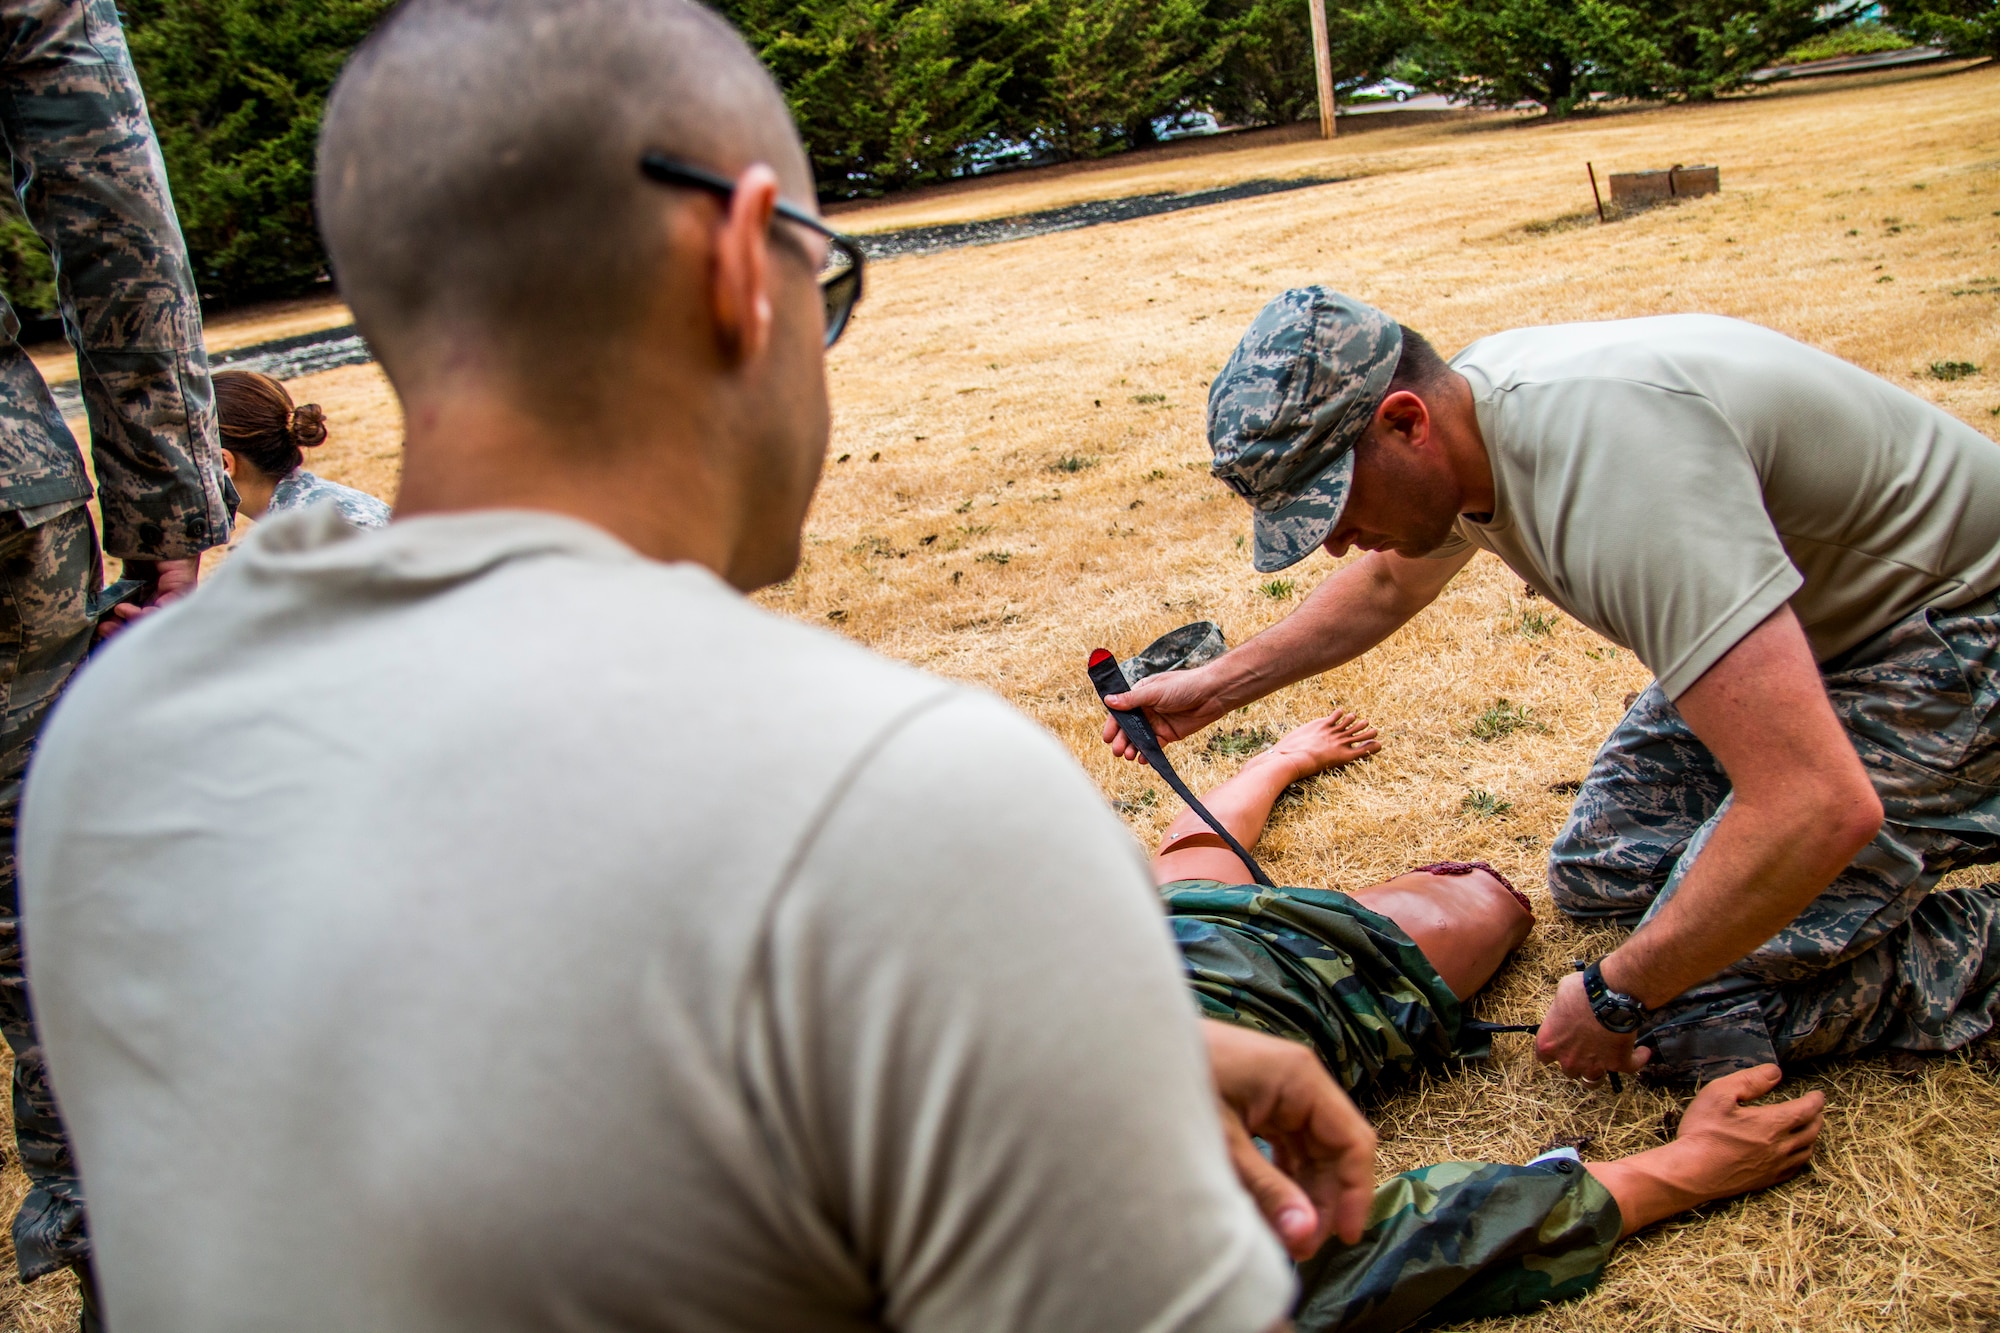 Captain Ryan Garabrandt, 446th Aeromedical Staging Squadron nurse, applies a tourniquet to a training manikin in preparation for the annual Expert Field Medical Badge test at McChord Field, Wash., Aug. 2, 2015. The Expert Field Medical Badge is a unique distinction worn only by the most battle-ready and elite medical personnel in the military. Every year at Joint Base Lewis-McChord, Wash., a  two-week intensive testing event is set up to qualify eligible service members from around the country for the right to wear the coveted badge. (U.S. Air Force photo by Senior Airman Daniel Liddicoet)